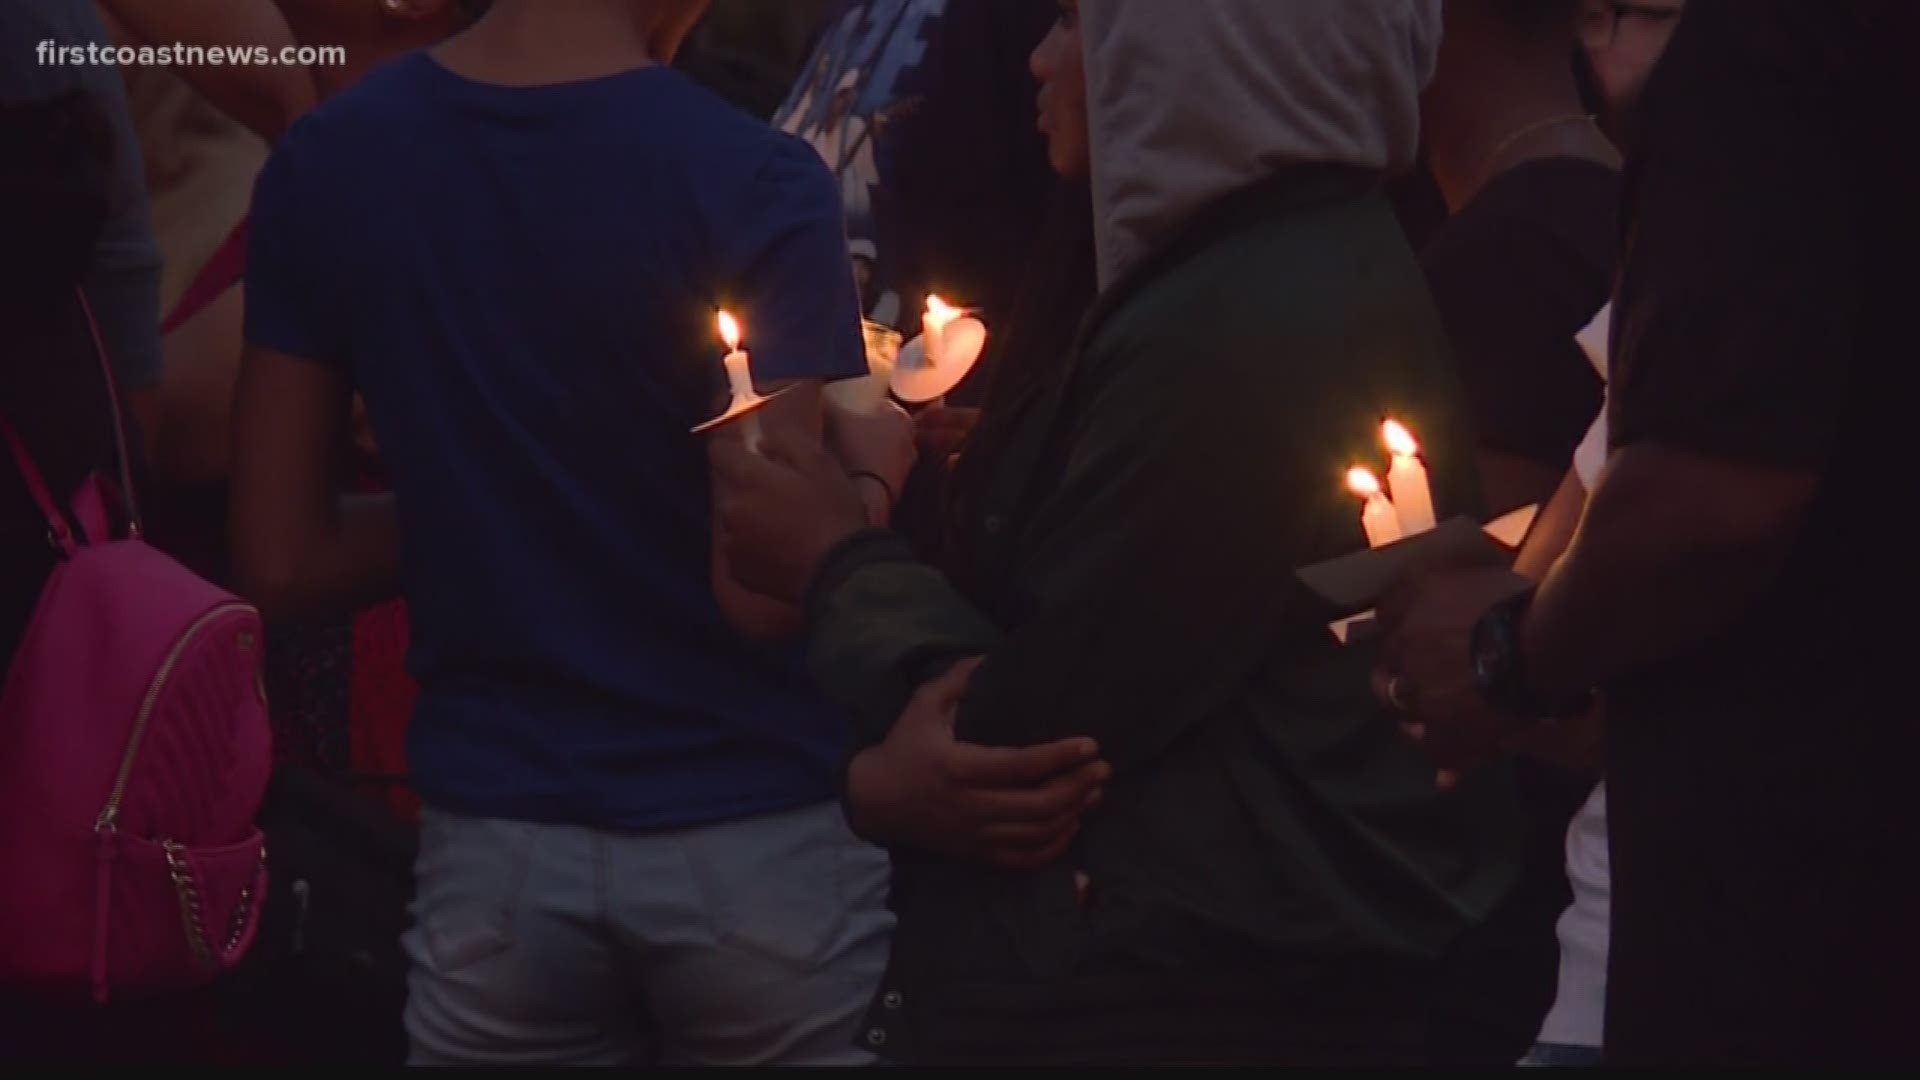 Classmates, community members and loved ones lit candles and prayed at the crash site where 16-year-old Keondre Moss died when the car he was in crashed into a tree.